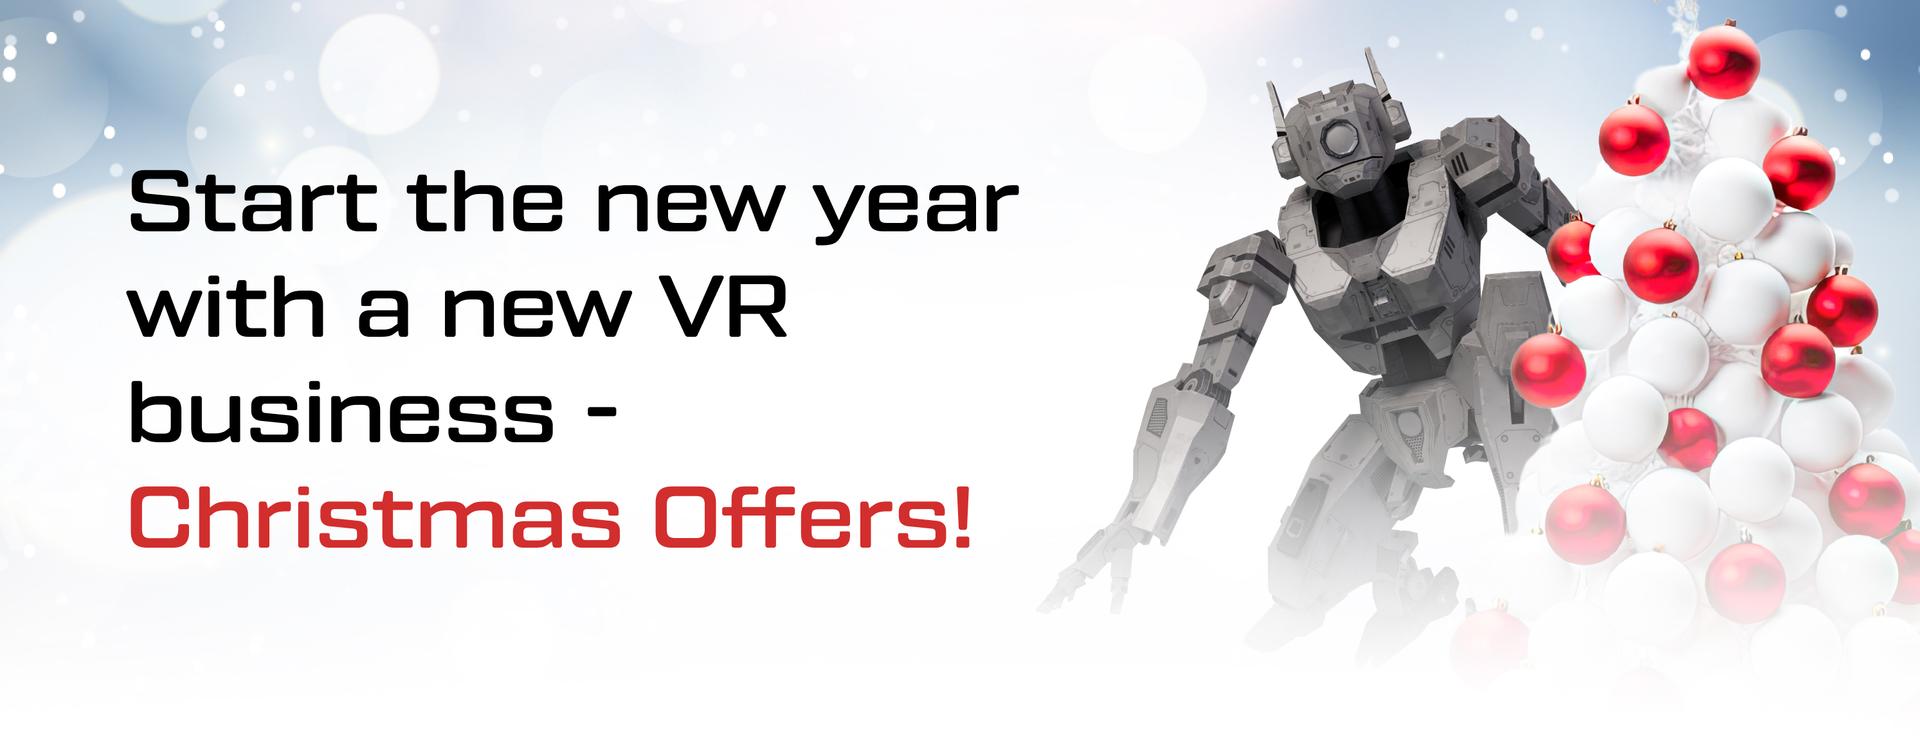 VION VR's Christmas Special Offers!